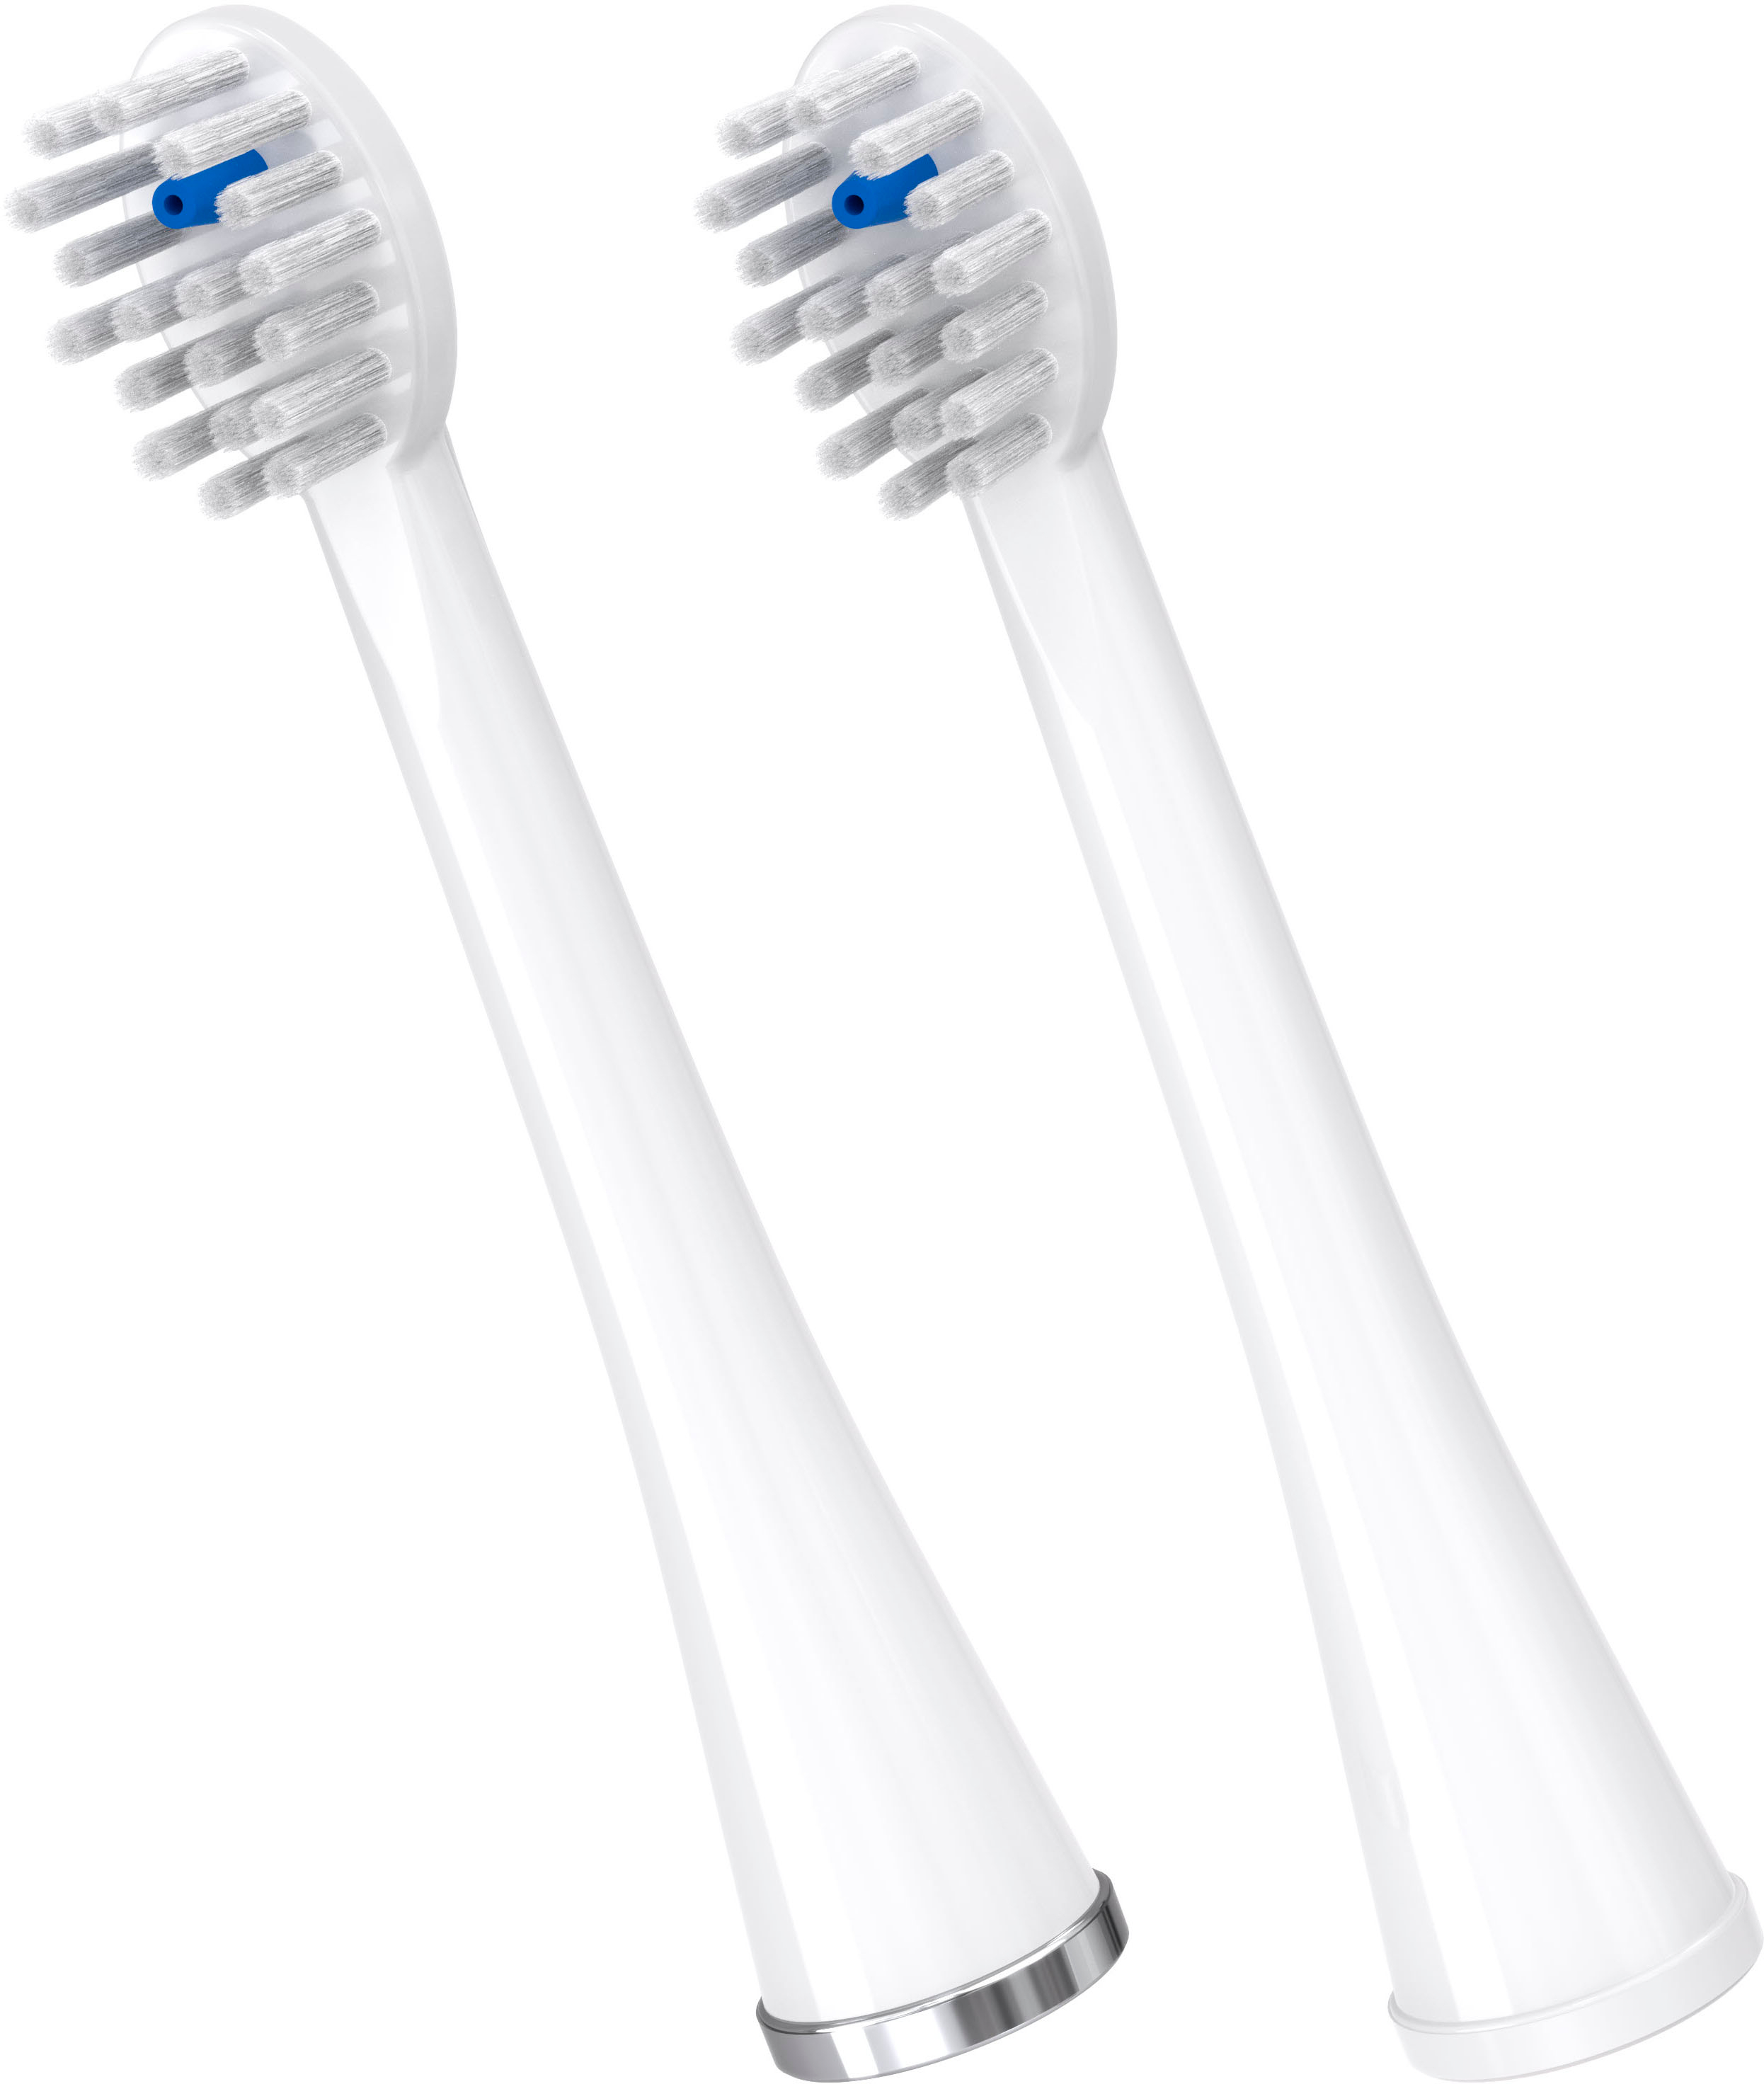 Waterpik - Sonic-Fusion Compact Replacement Flossing Brush Heads - White